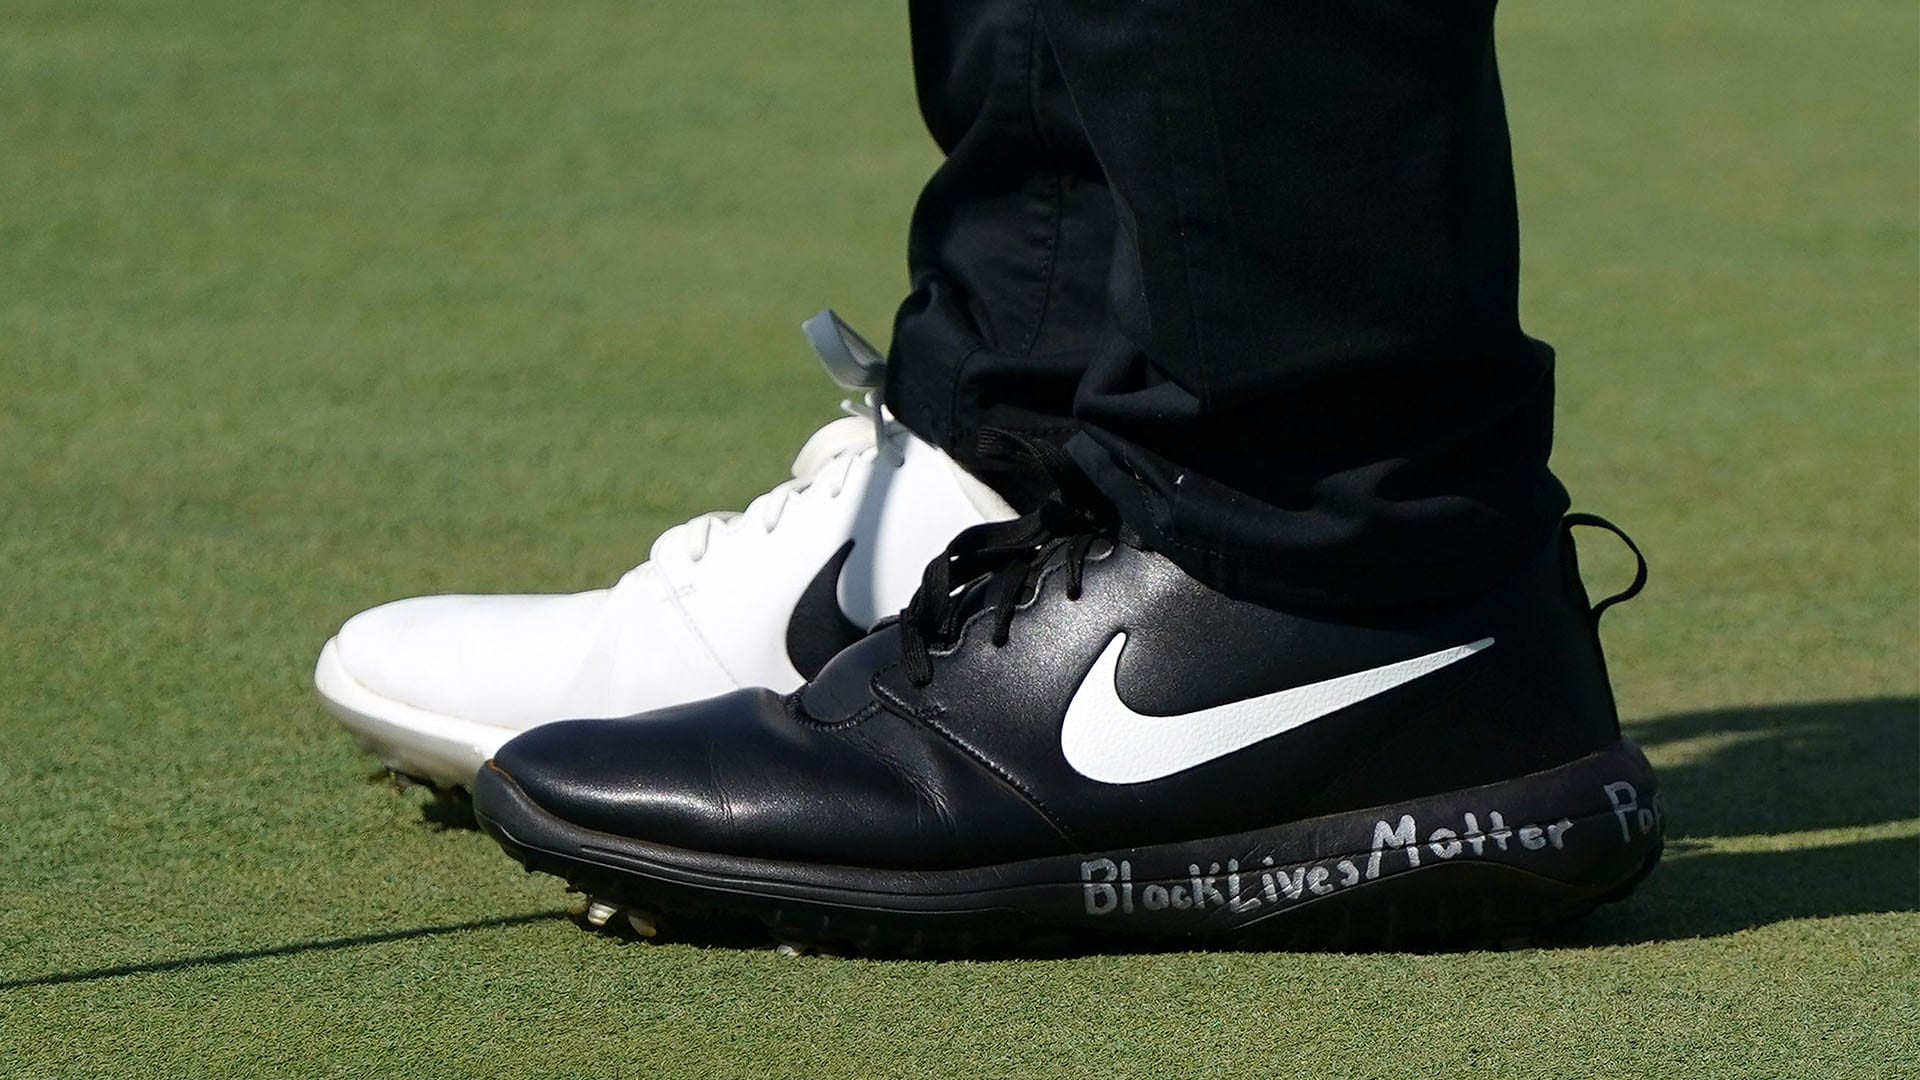 Play on: Players ‘on board’ with PGA Tour’s response to racial injustice